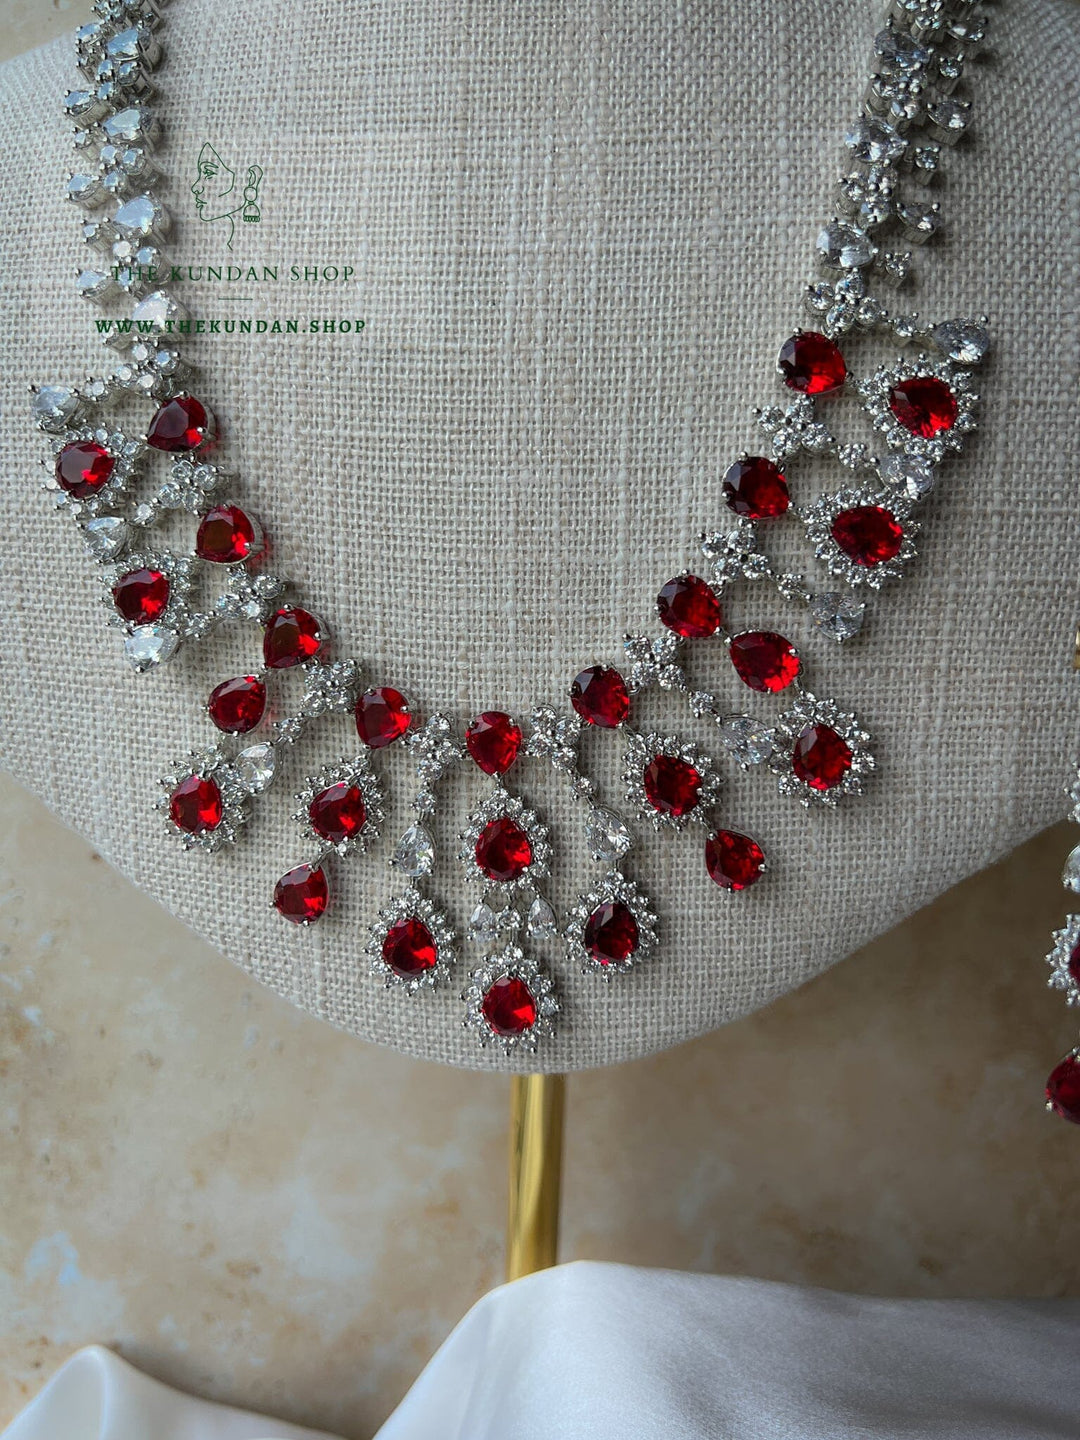 Blindsided in Silver & Red Necklace Sets THE KUNDAN SHOP 